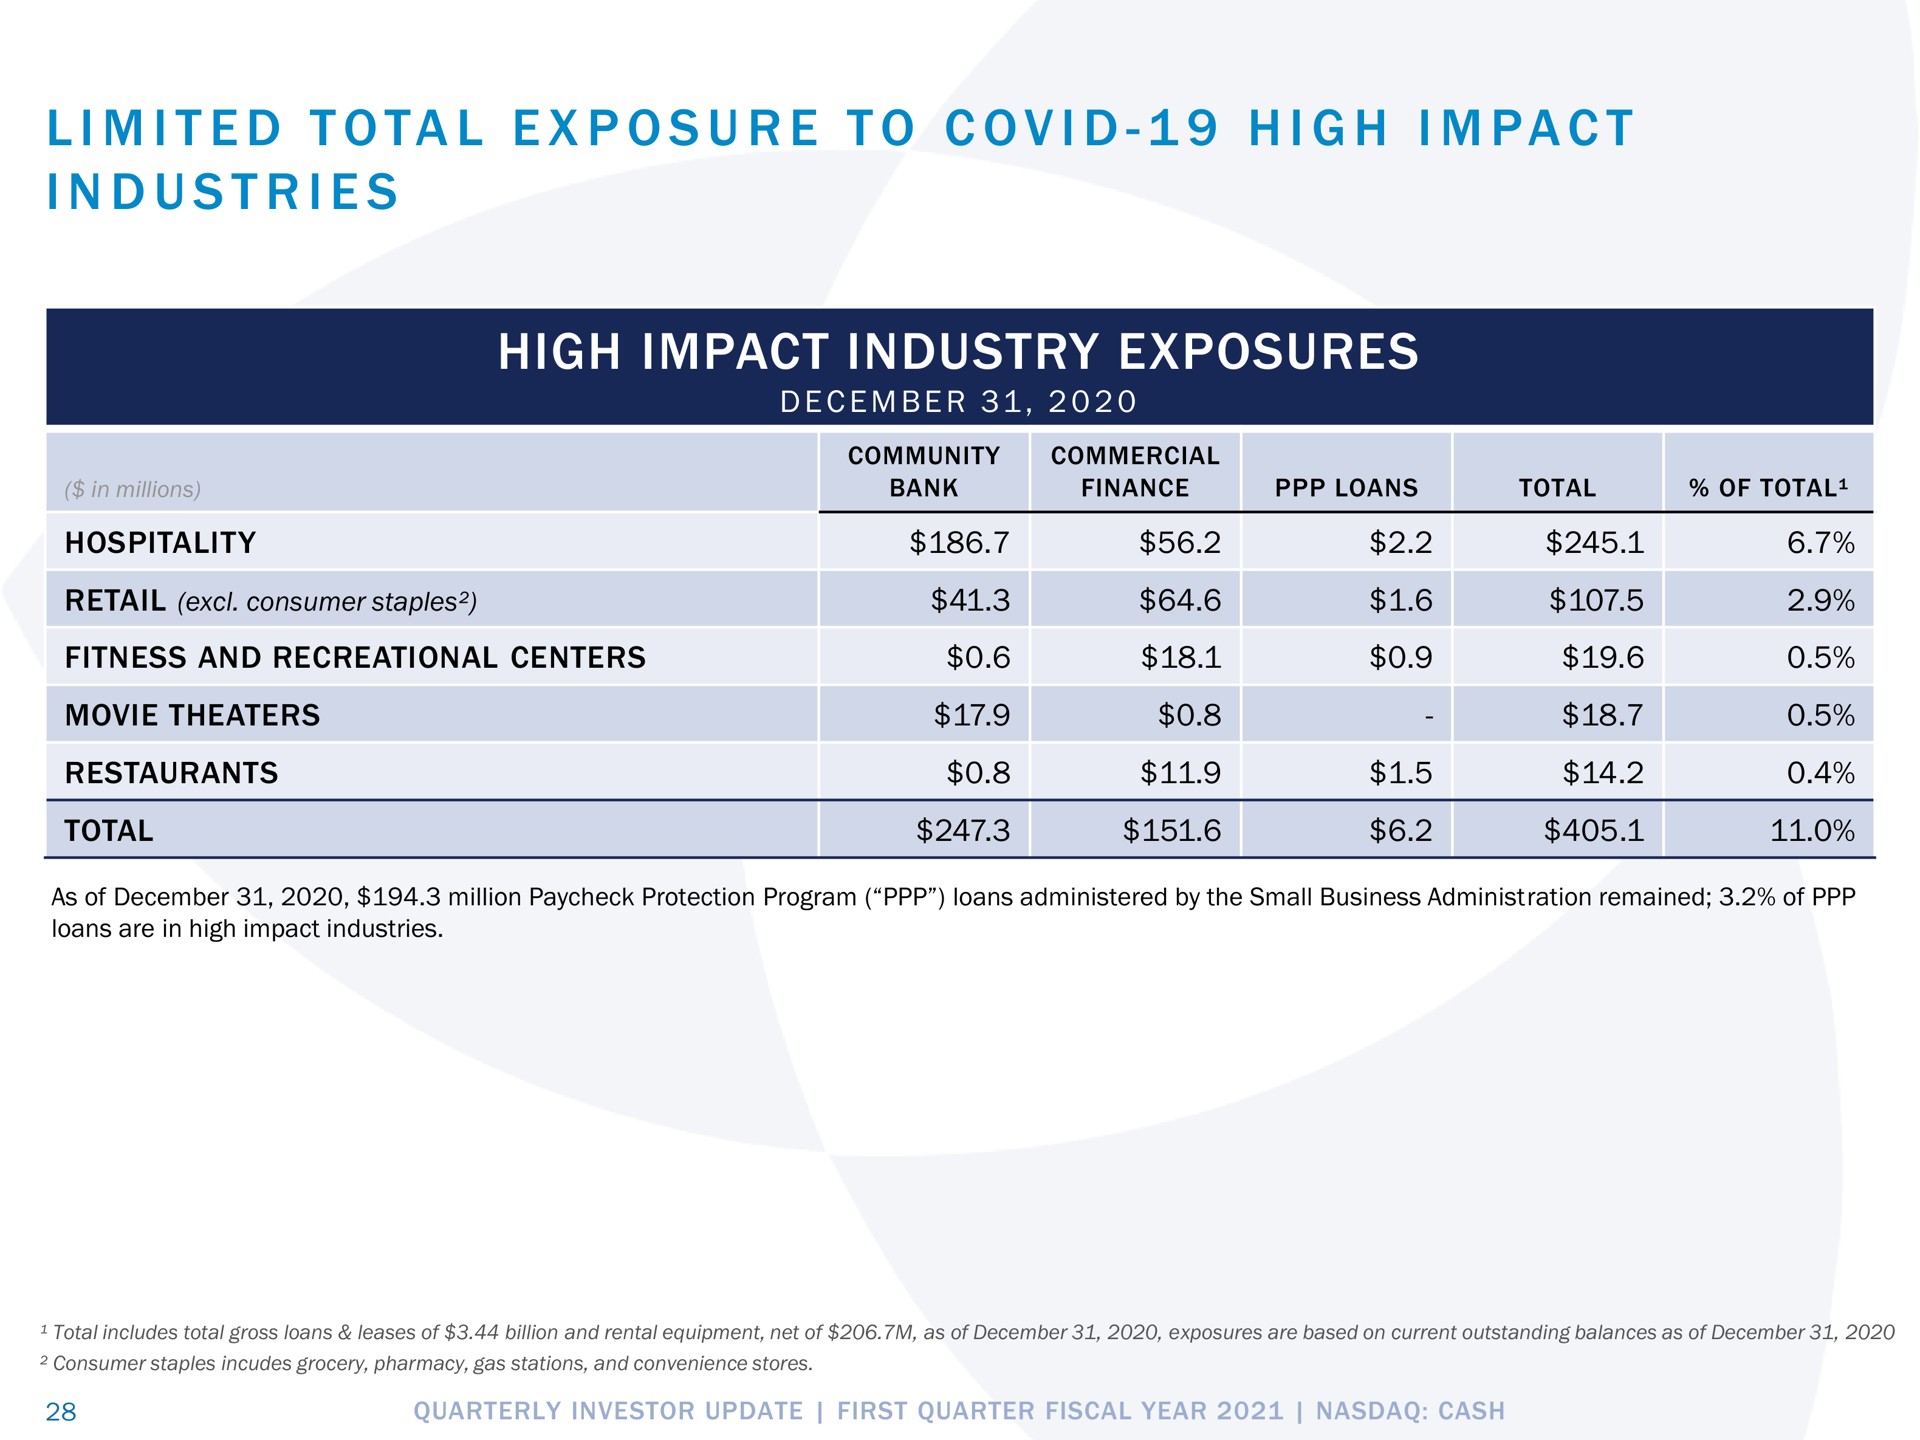 i i i i i a i i high impact industry exposures limited total exposure to covid industries | Pathward Financial